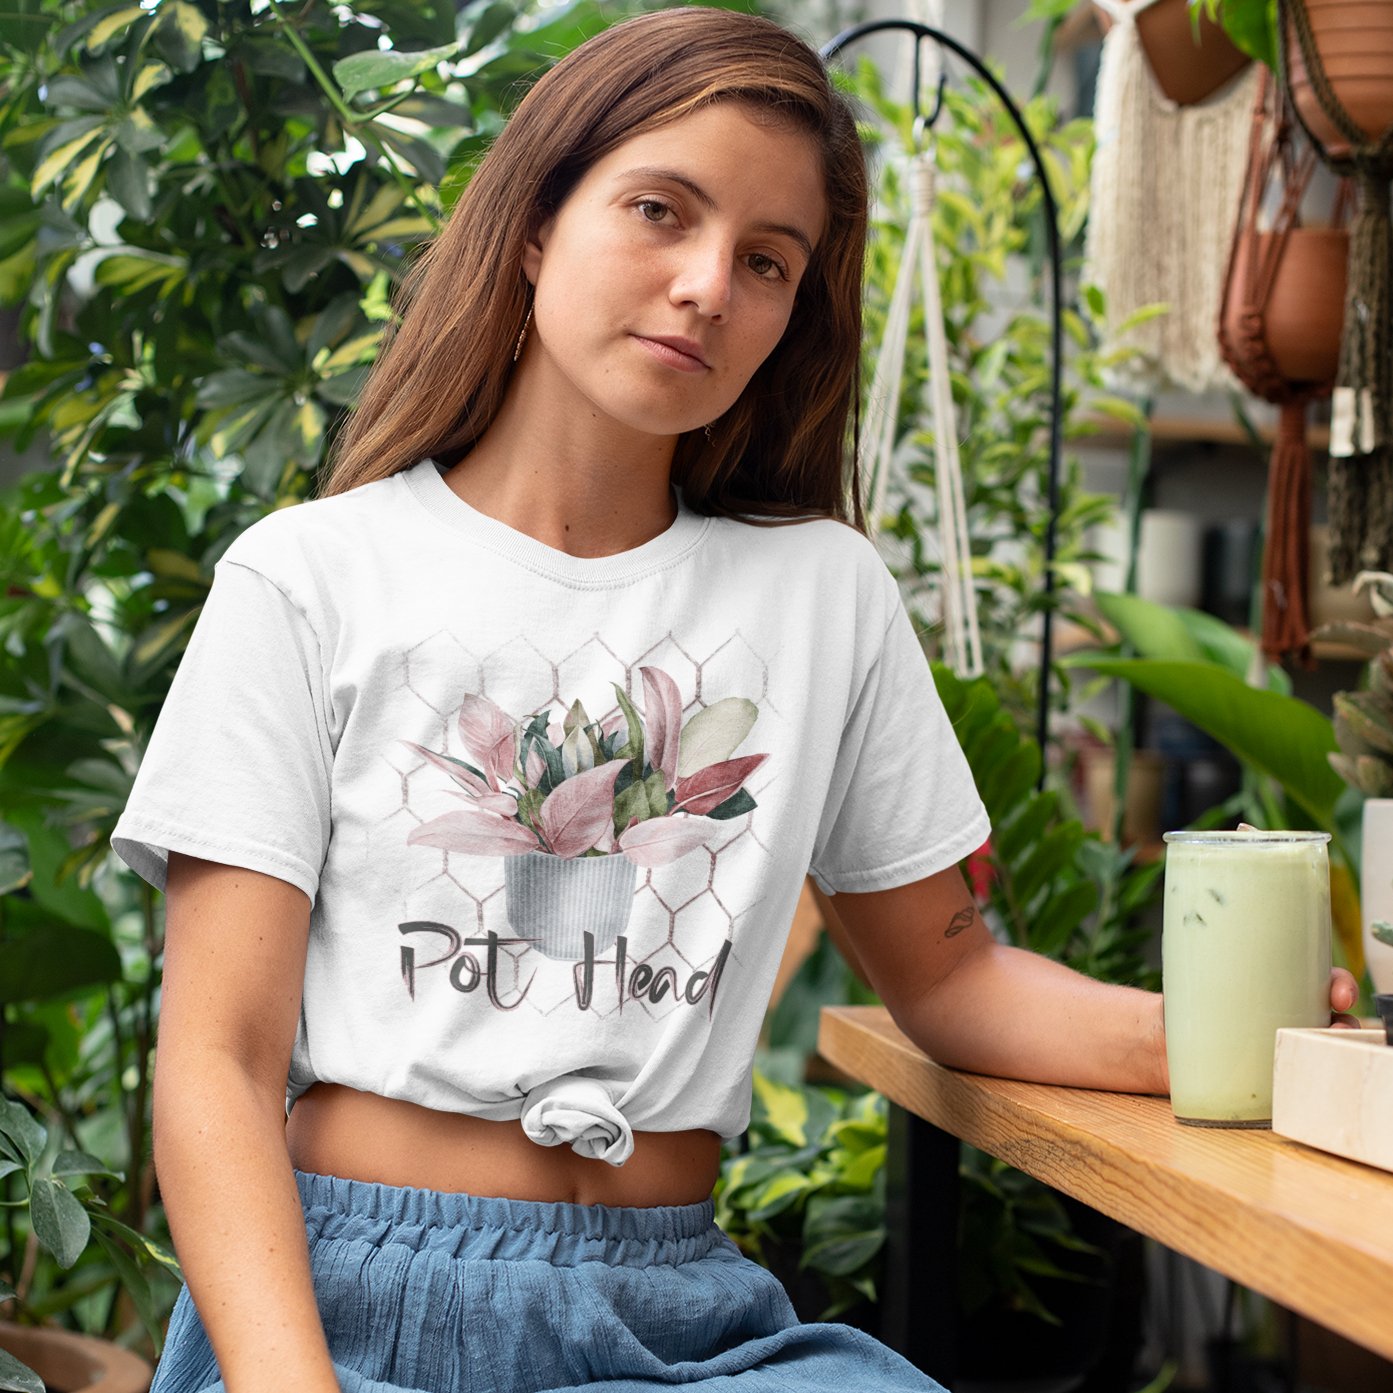 Pot Head: Plant Enthusiast T-shirt – Where Greenery Takes the High Road!